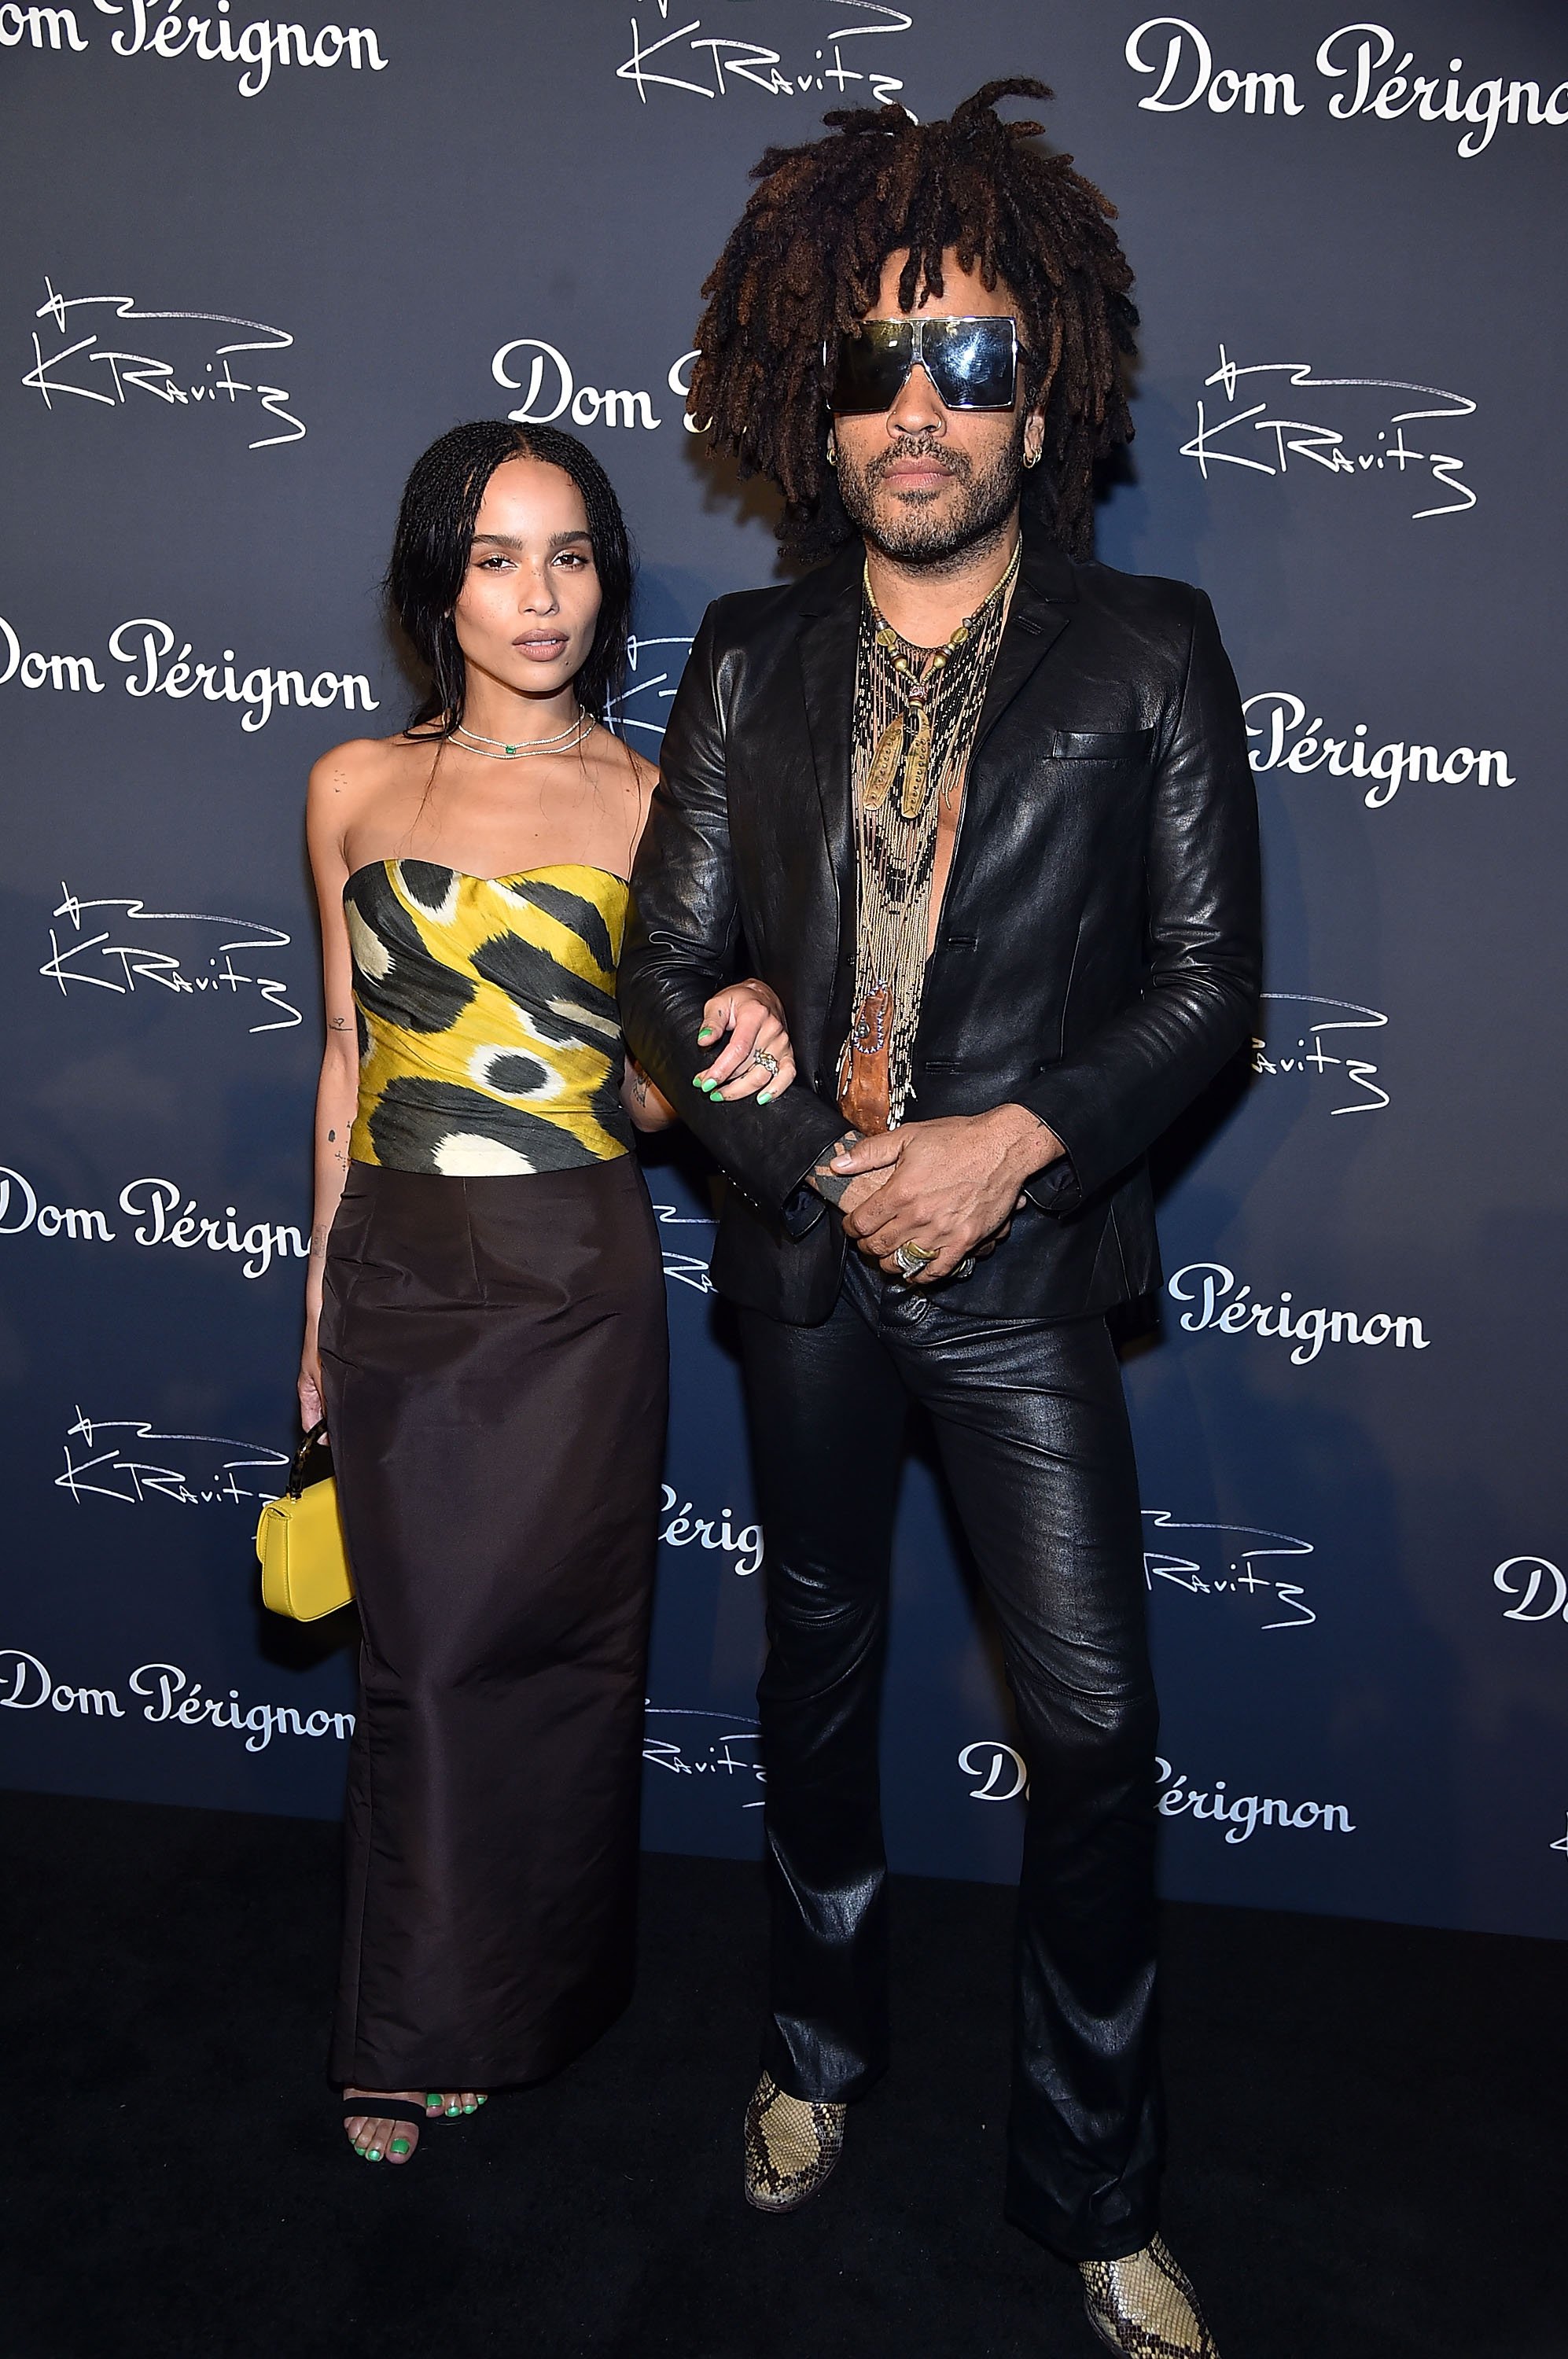 Lenny Kravitz and his daughter Zoe Kravitz attend the Dom Perignon & Lenny Kravitz "Assemblage" Exhibition in September 2018 in NYC | Photo: Getty Images